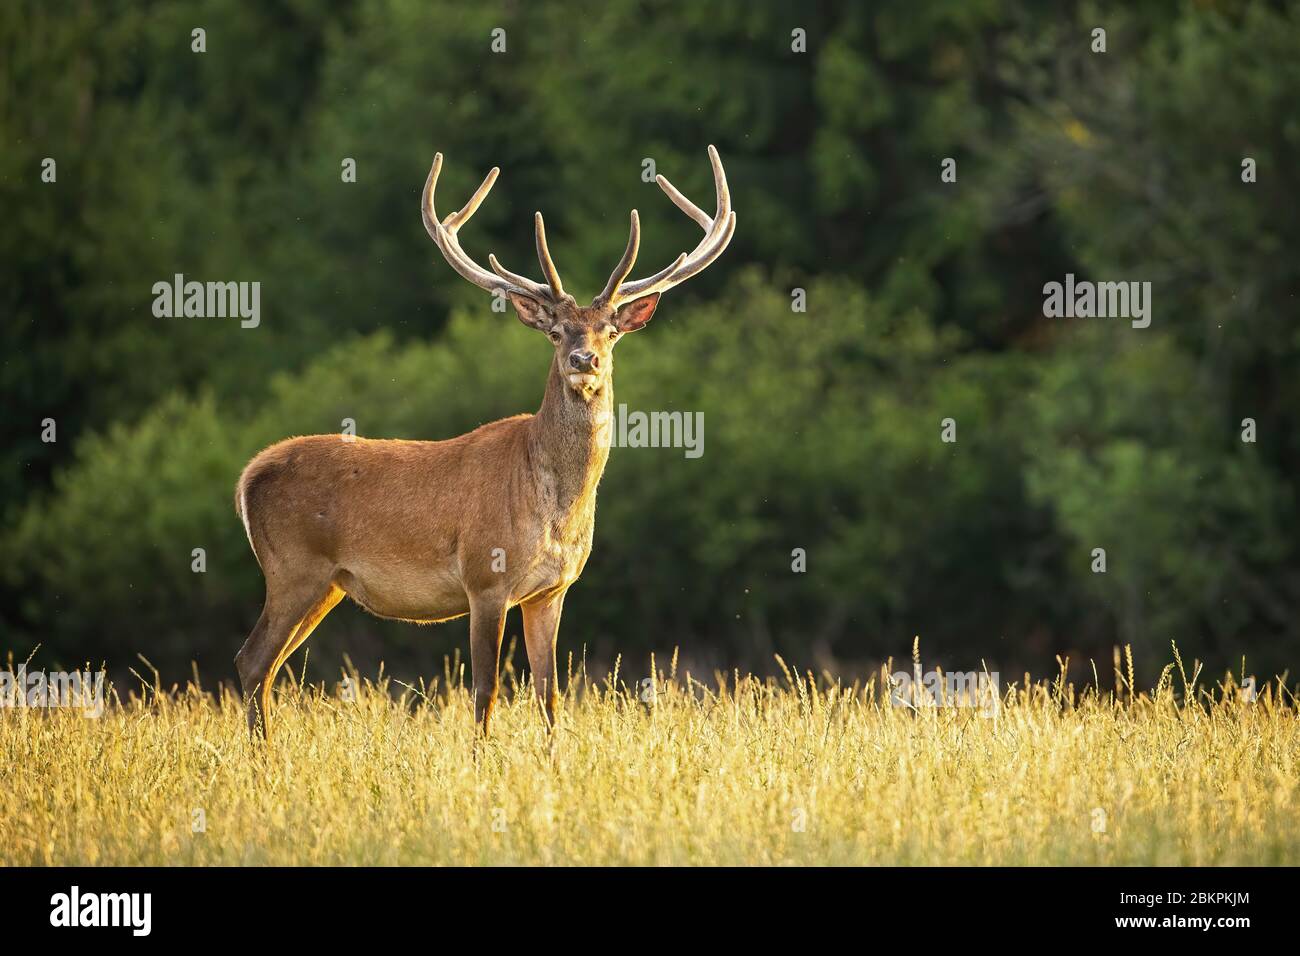 Sunlit red deer stag with new antlers growing facing camera in summer nature Stock Photo